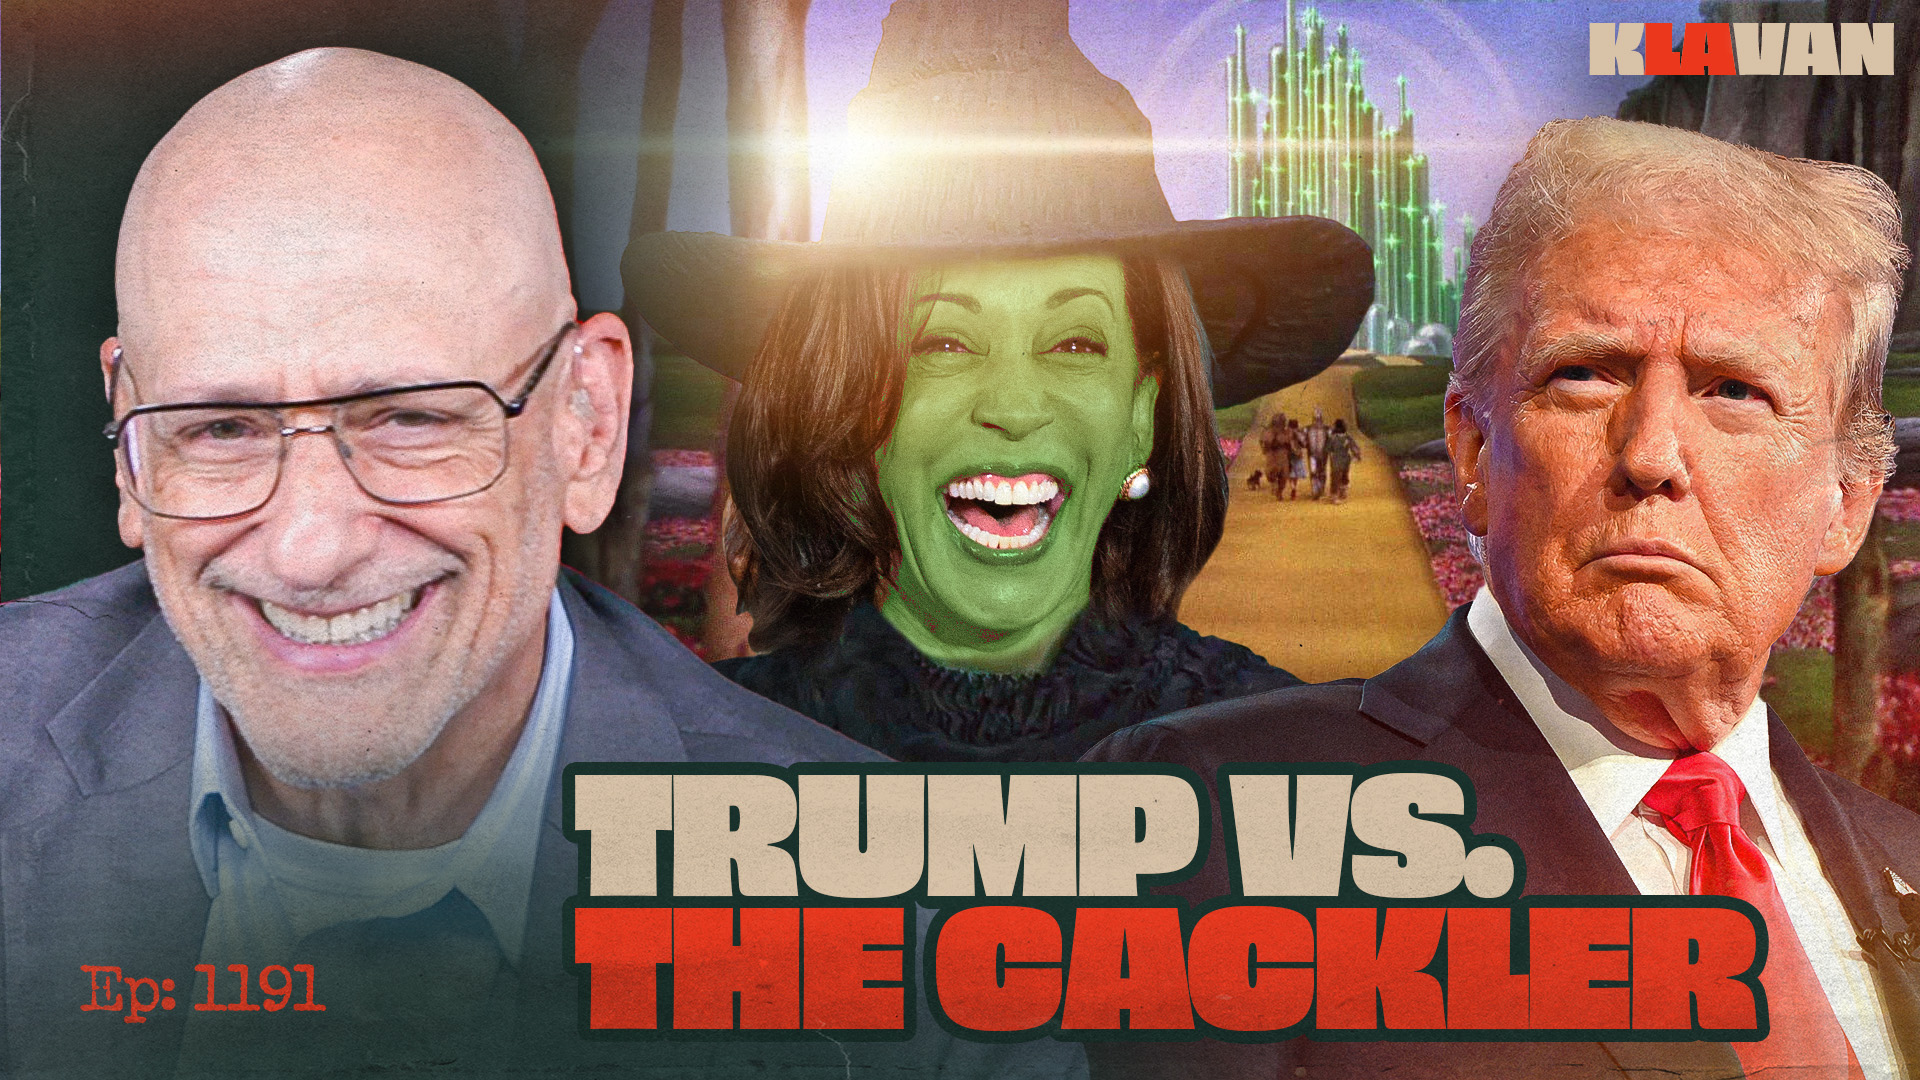 Ep. 1191 - Trump vs. The Cackler